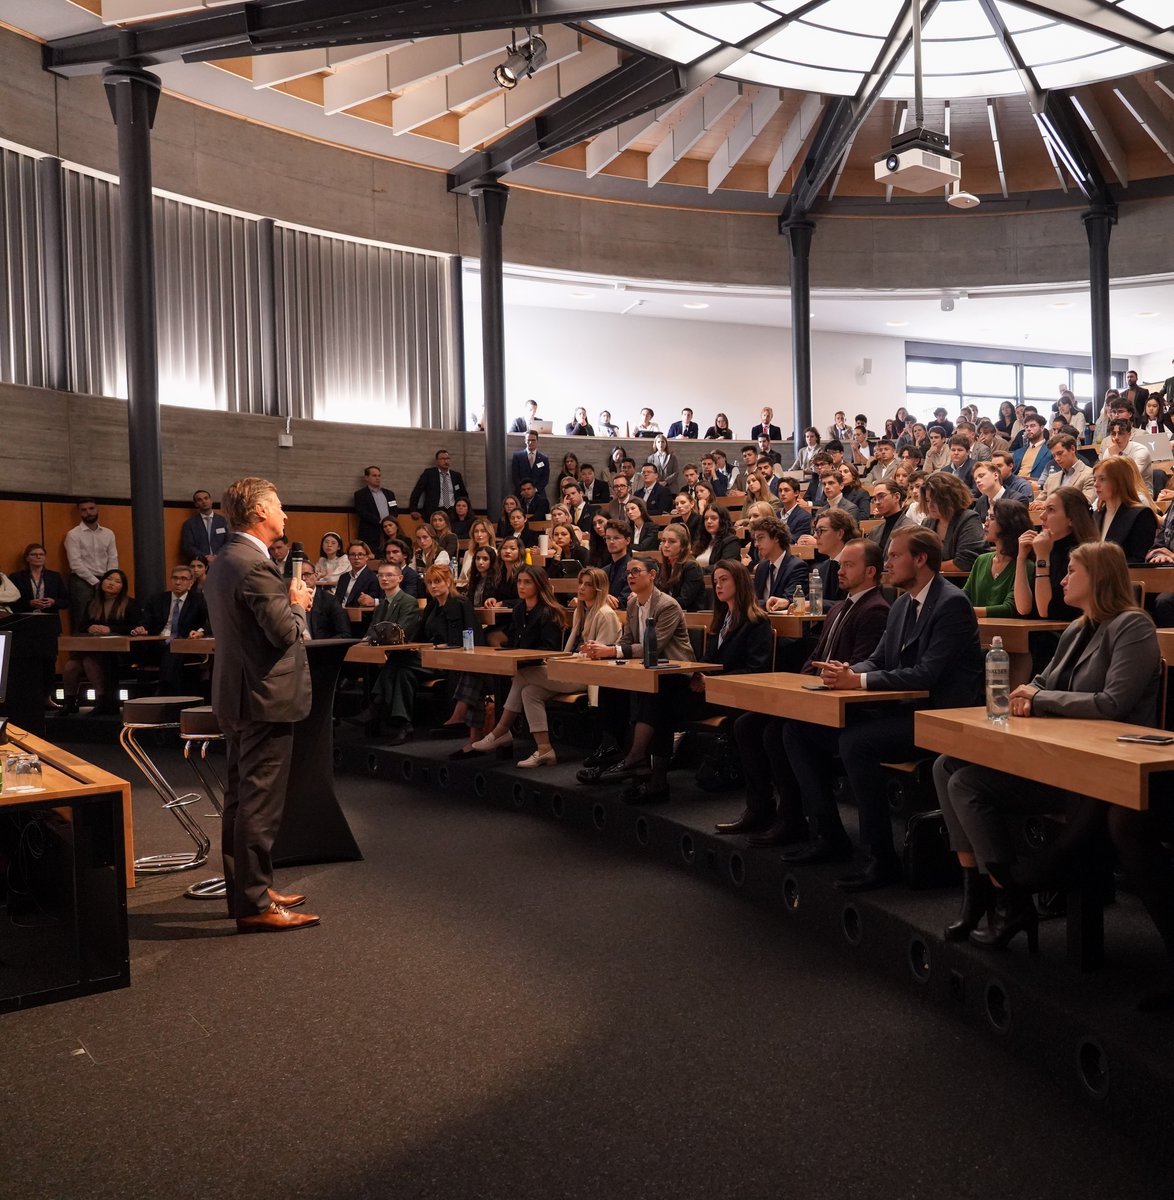 1st #AccorDay2023 event at @EHLnews. A full day immersing students in the Accor world, its brands, and job opportunities. Our Chief Talent & Culture Officer, Steven Daines & CEO #SébastienBazin inspired almost 300 students. Thanks to EHL for hosting us! 🤝